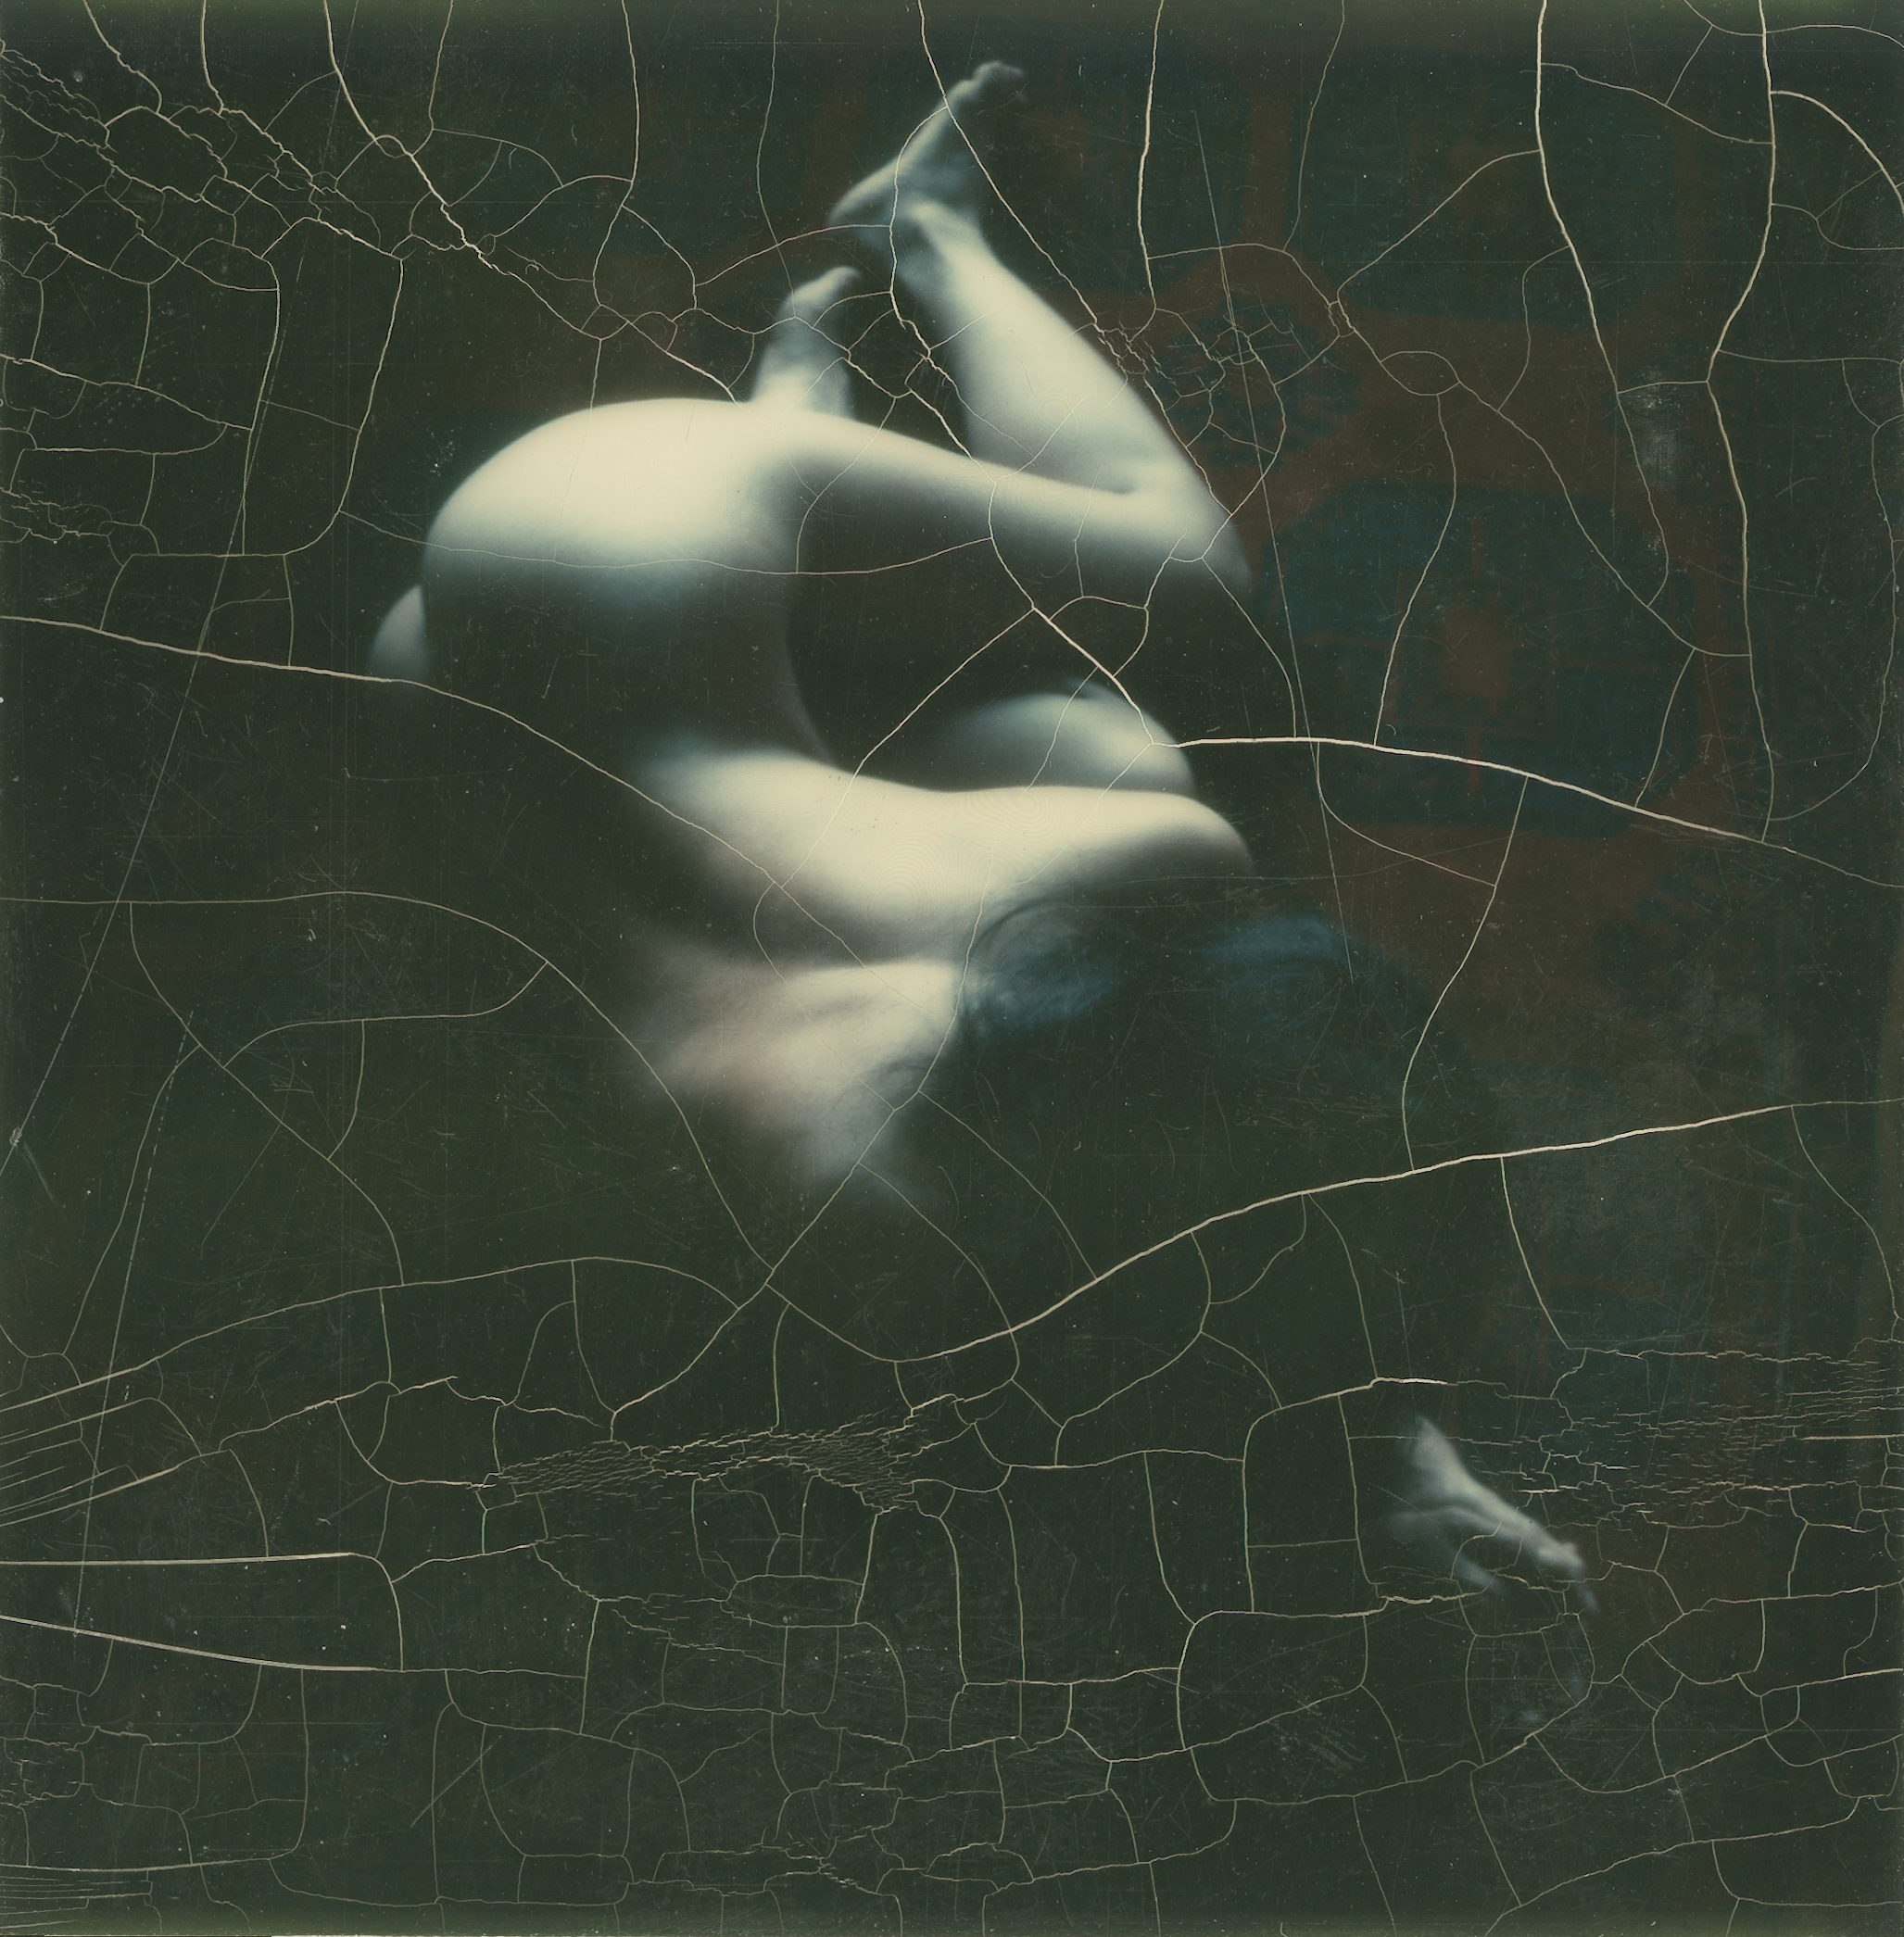 Nude photographed with a Polaroid SX-70 camera, 1972.